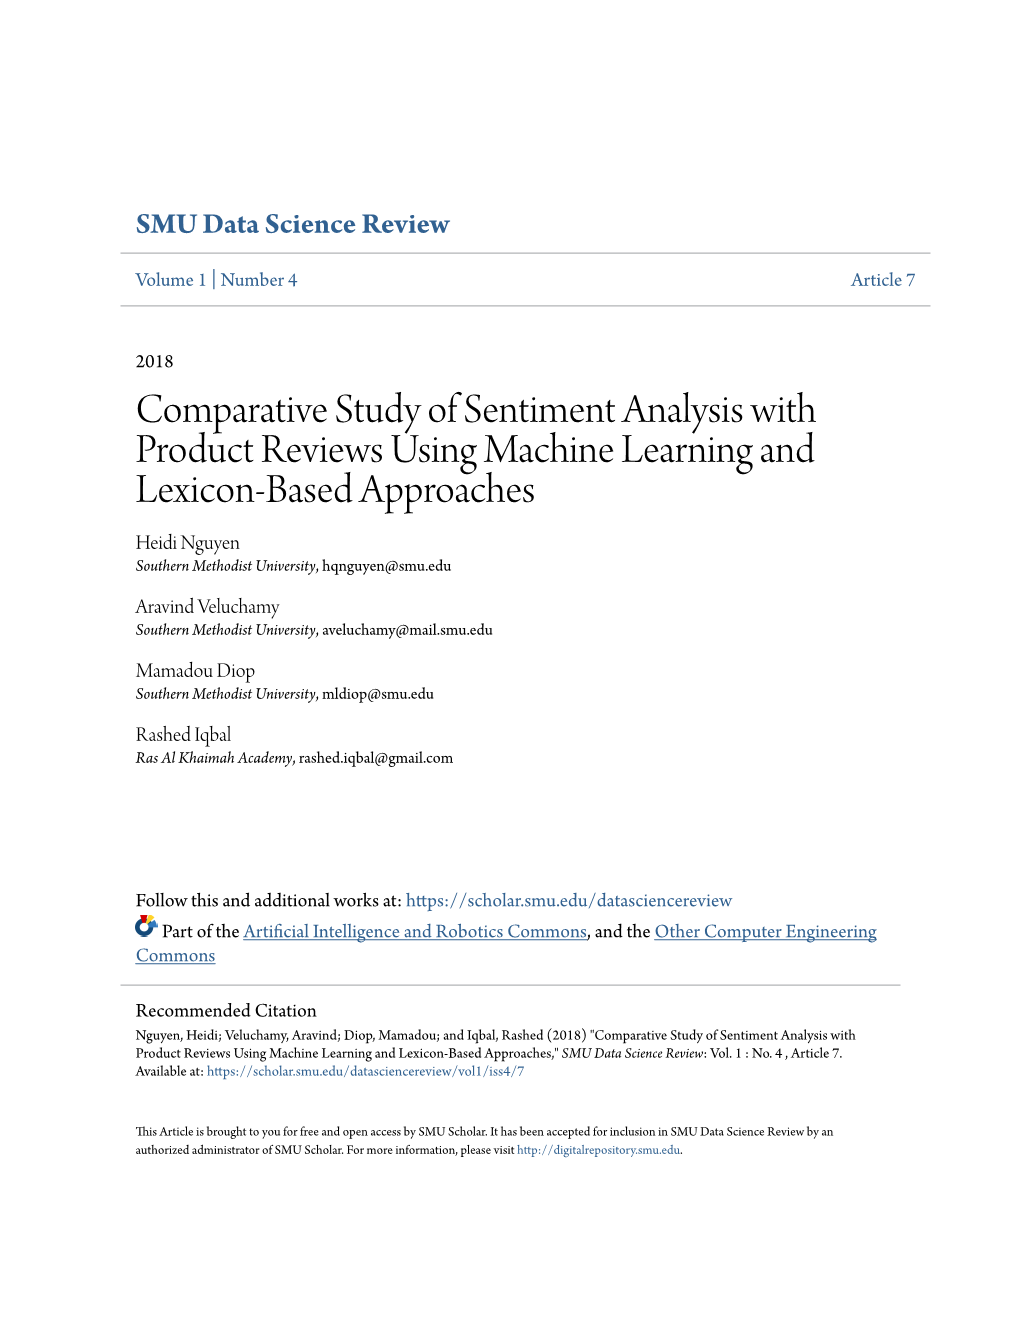 Comparative Study of Sentiment Analysis with Product Reviews